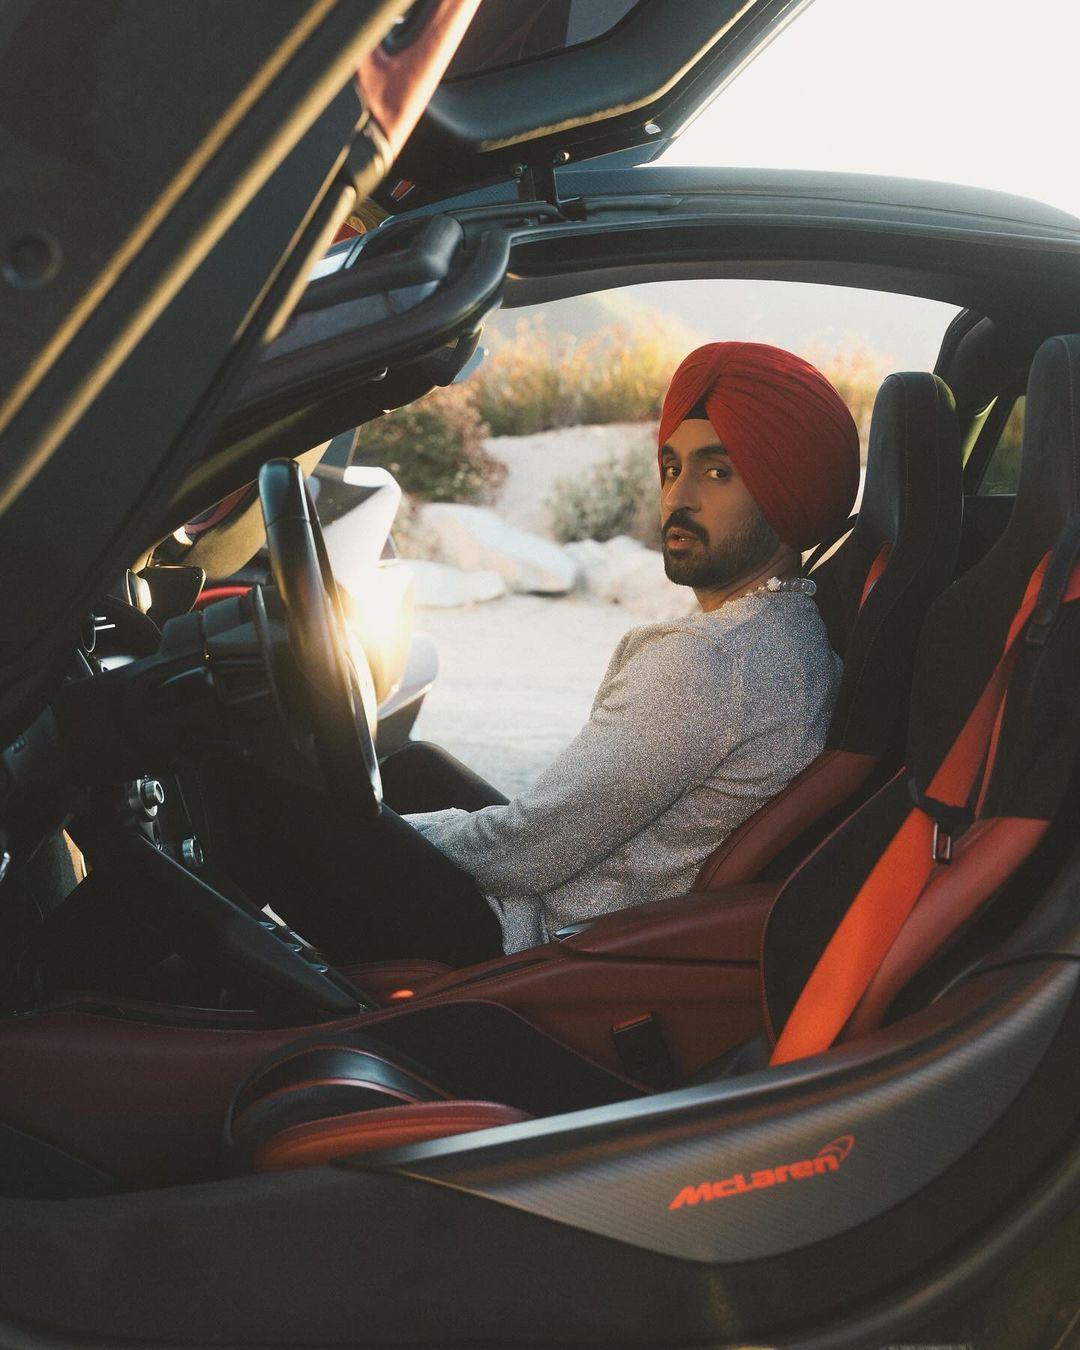 Diljit continues to up his own 'cool' game. The way the singer poses in the car while on his A-game style-wise. We can hardly take it!